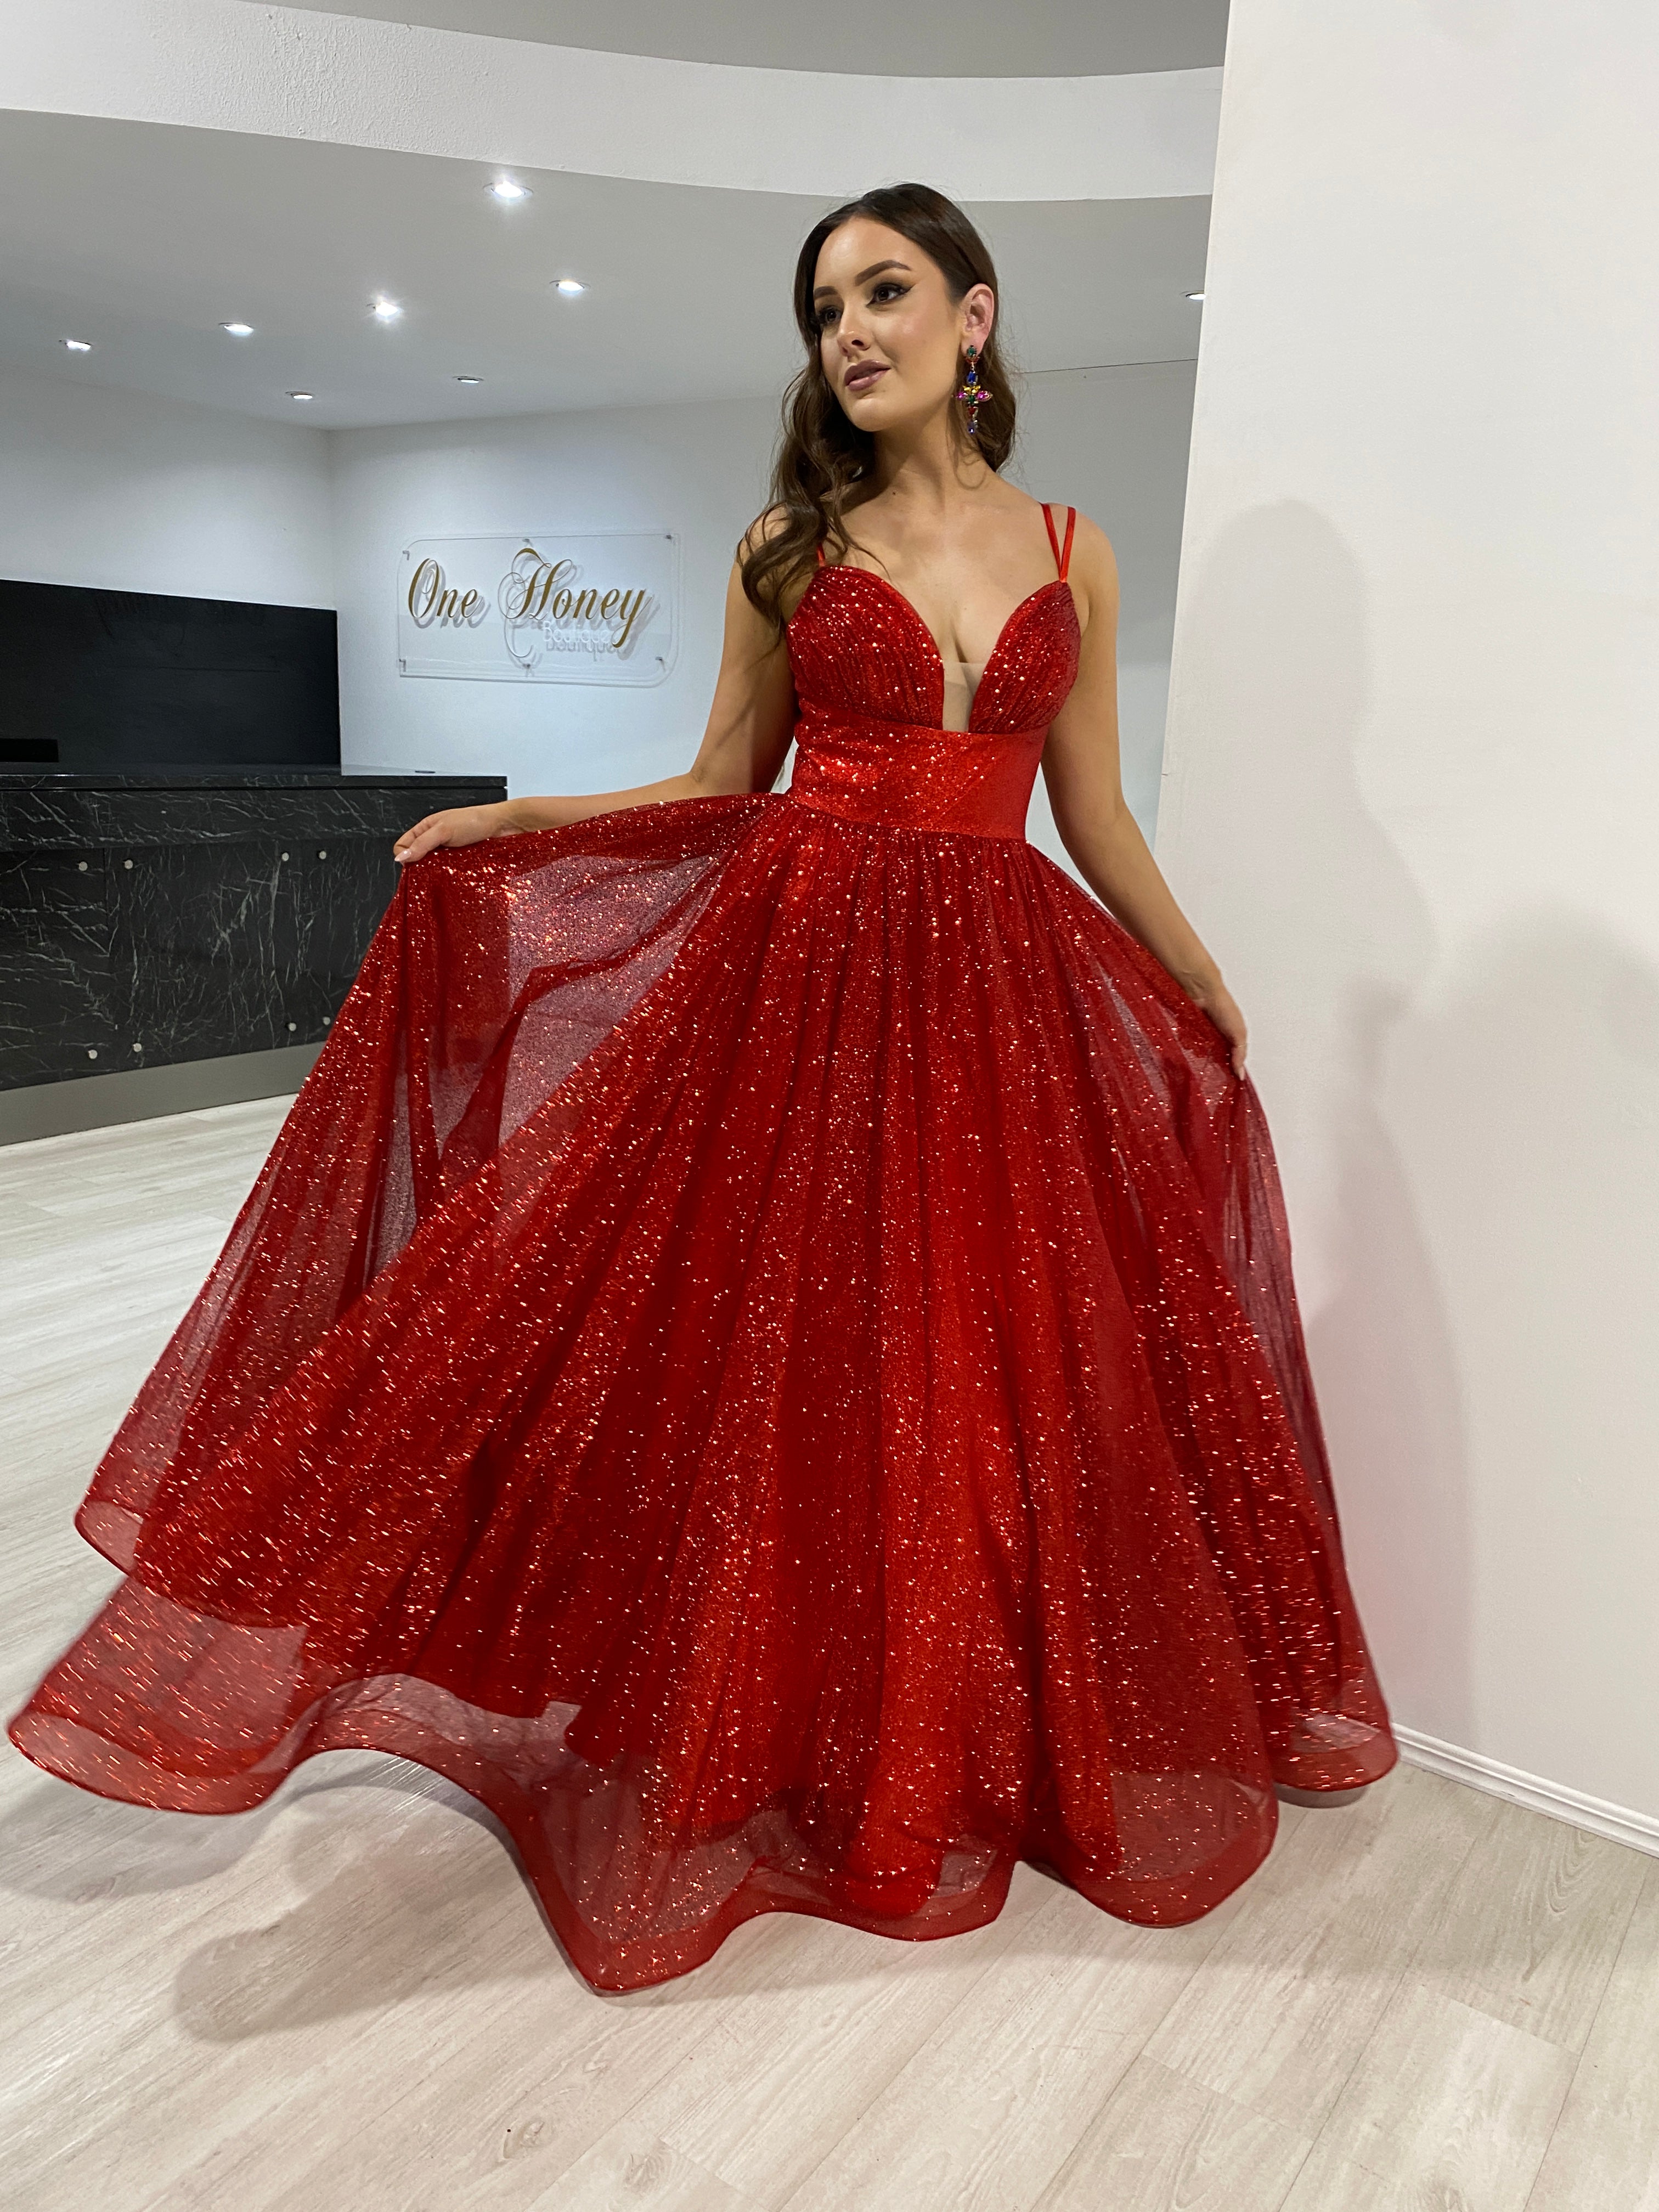 Sparkly Red Sequin High Low Prom Dresses Vintage Ball Gown FD2414 vini –  Viniodress